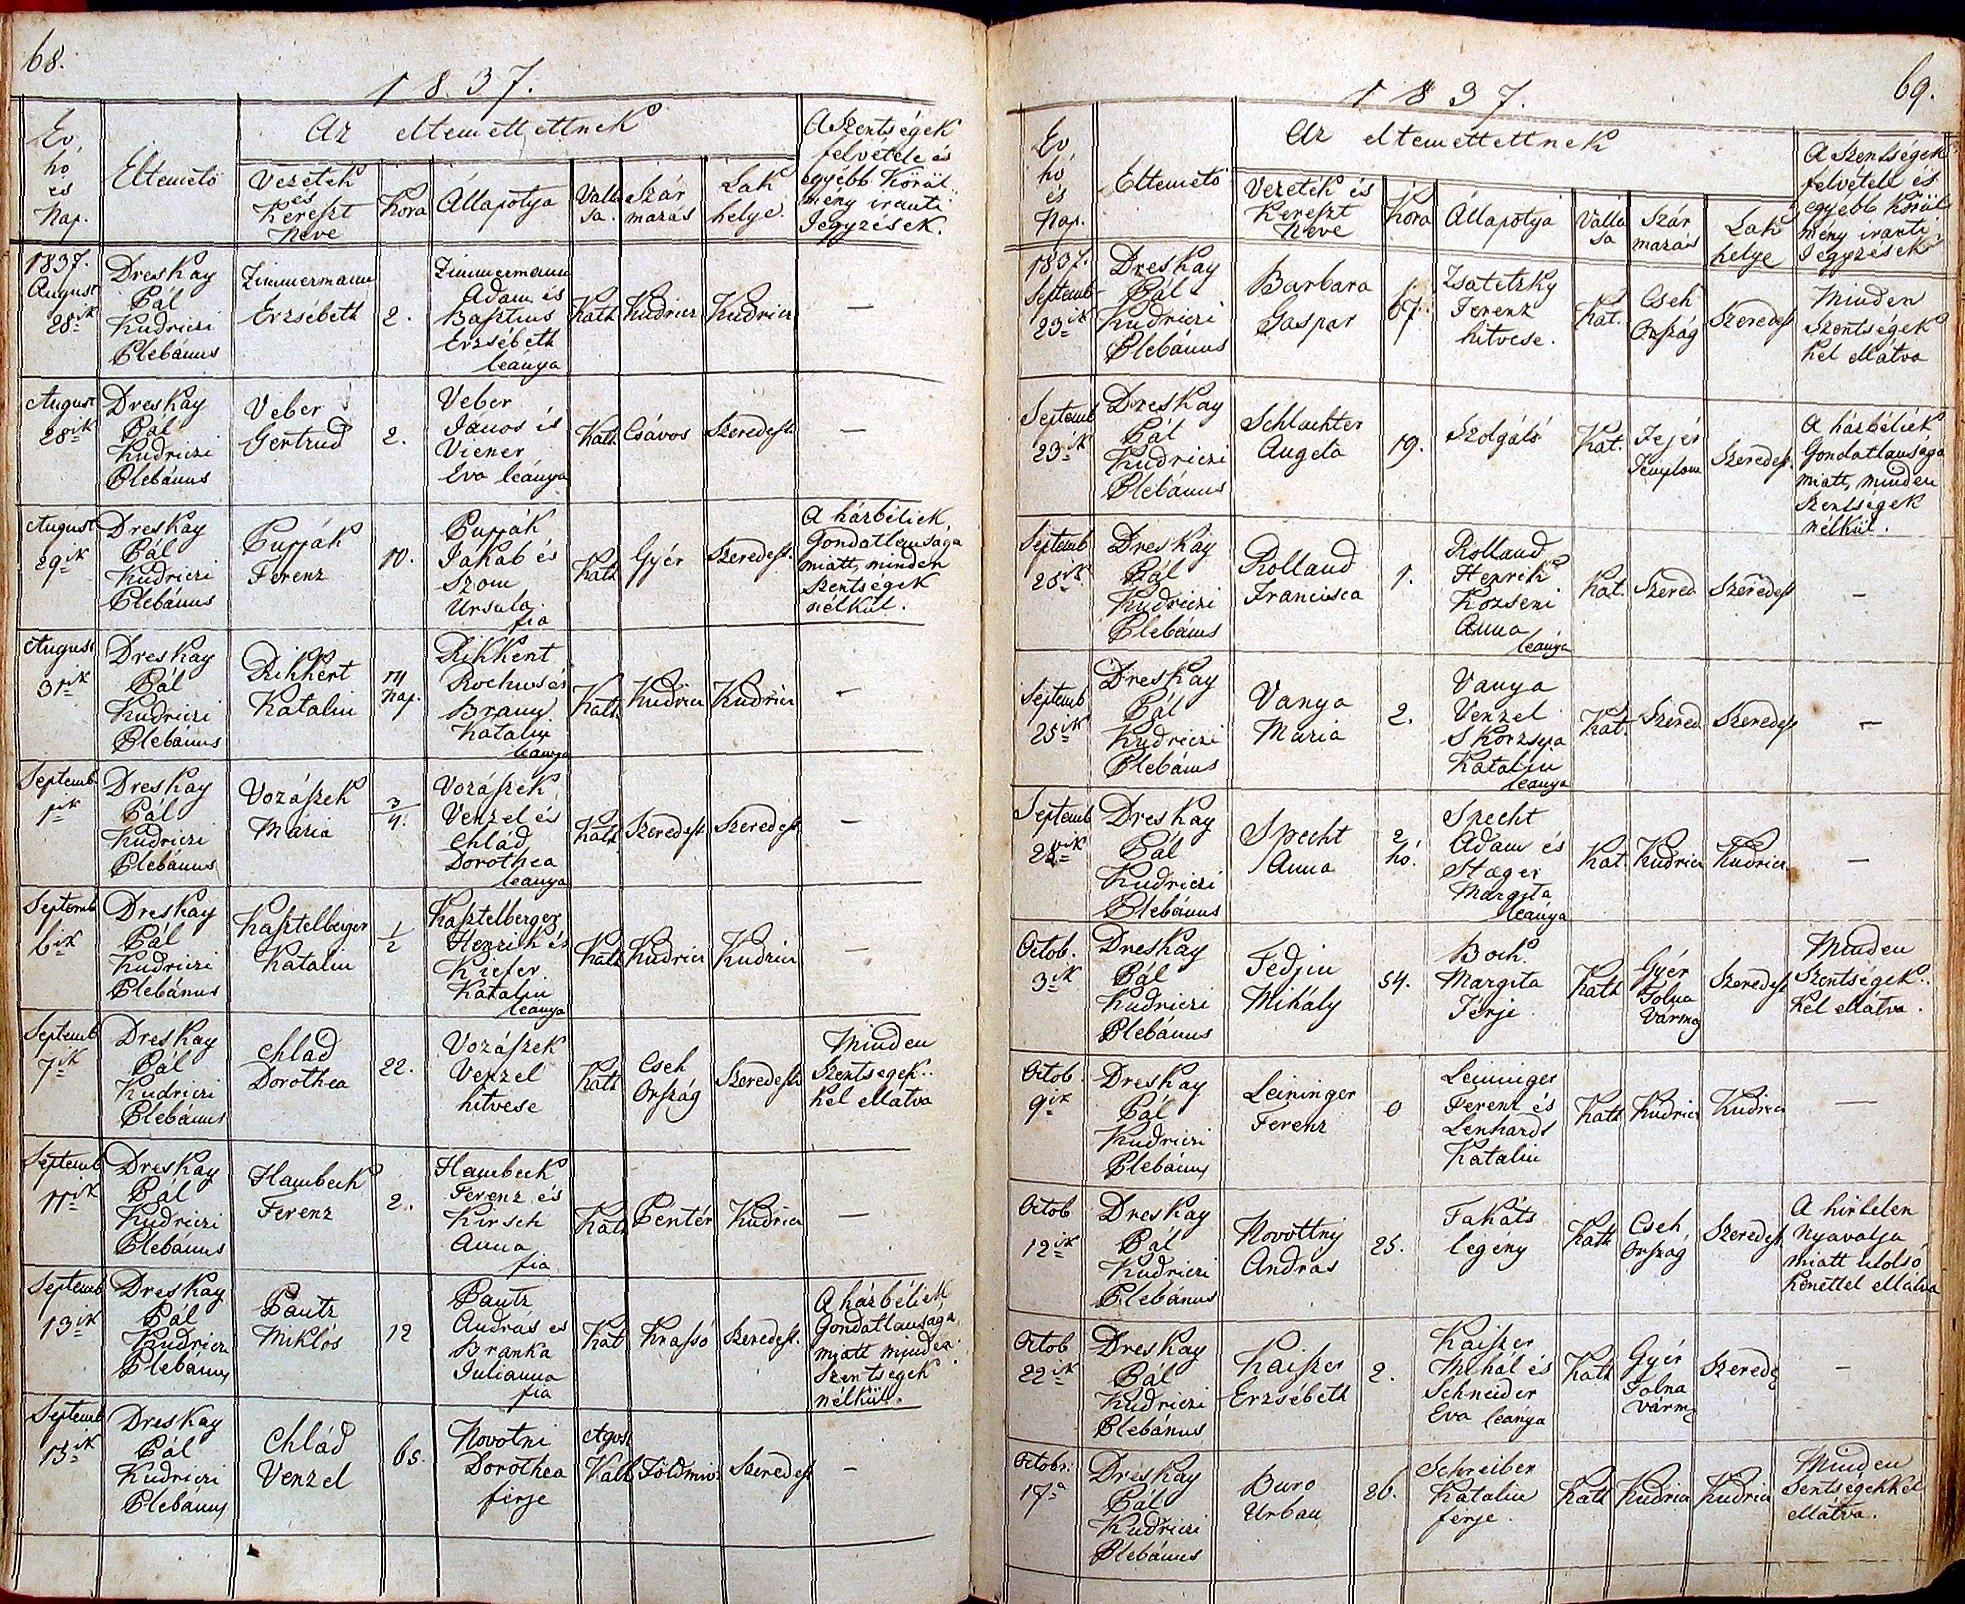 images/church_records/DEATHS/1775-1828D/068 i 069